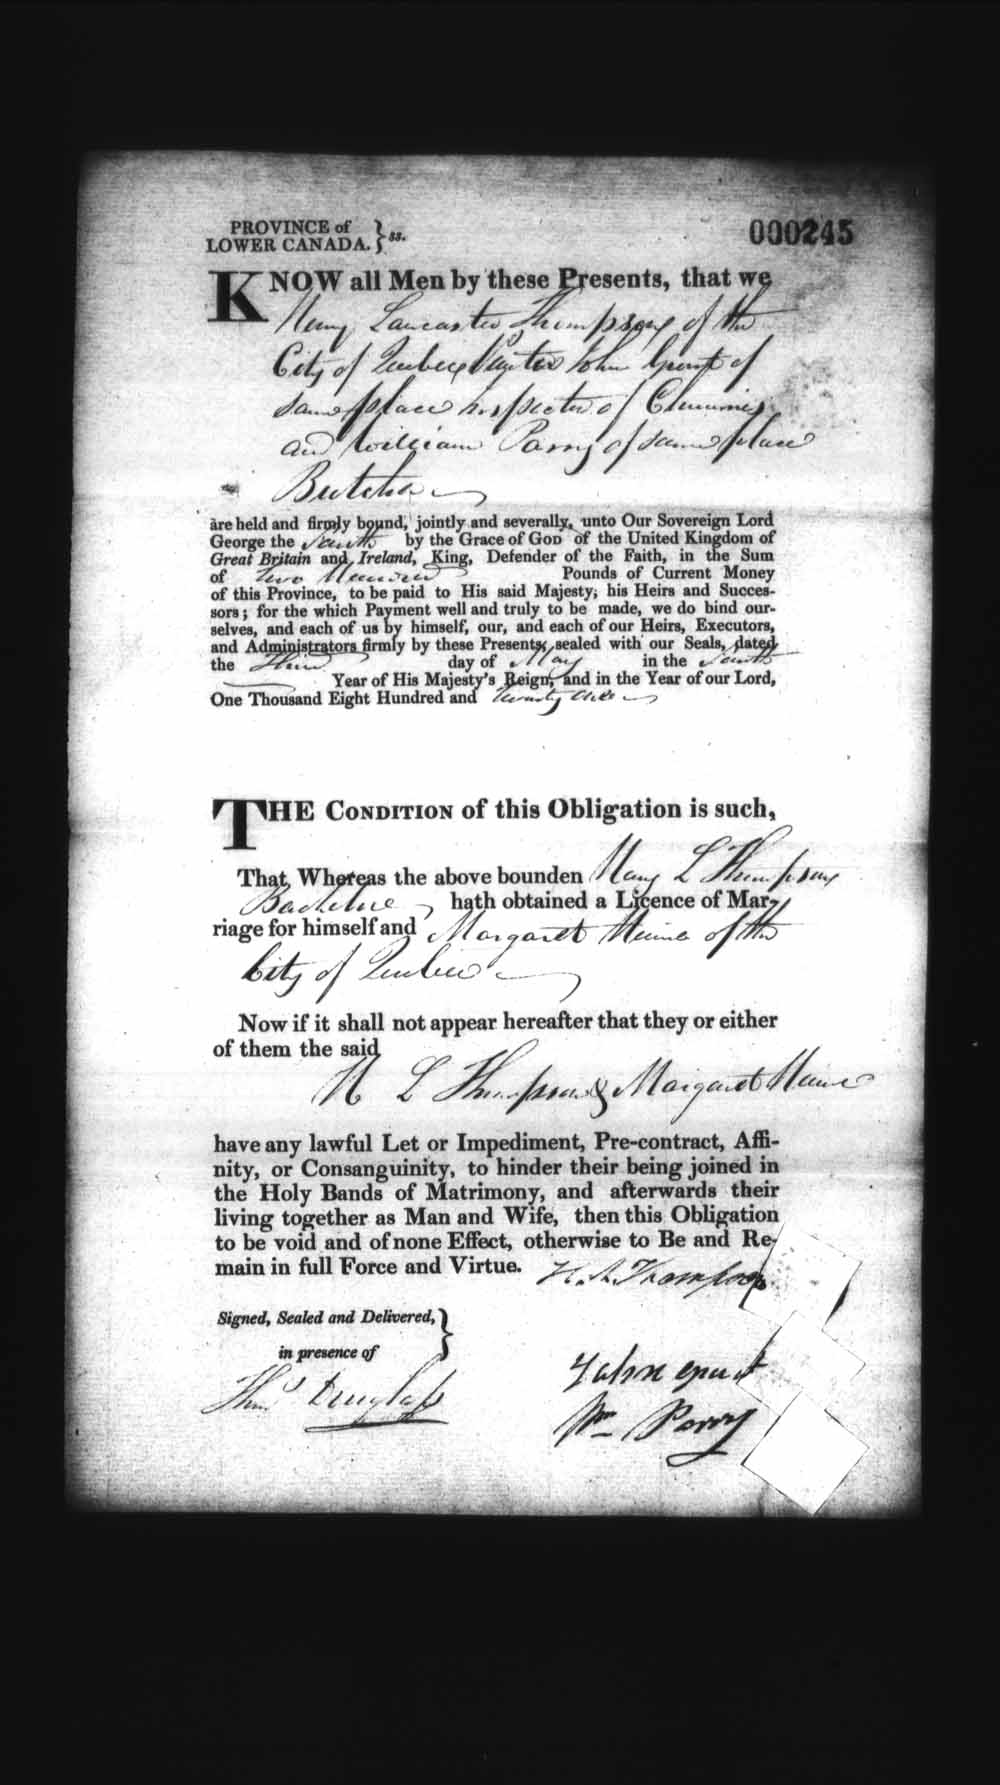 Digitized page of Upper and Lower Canada Marriage Bonds (1779-1865) for Image No.: e008236106